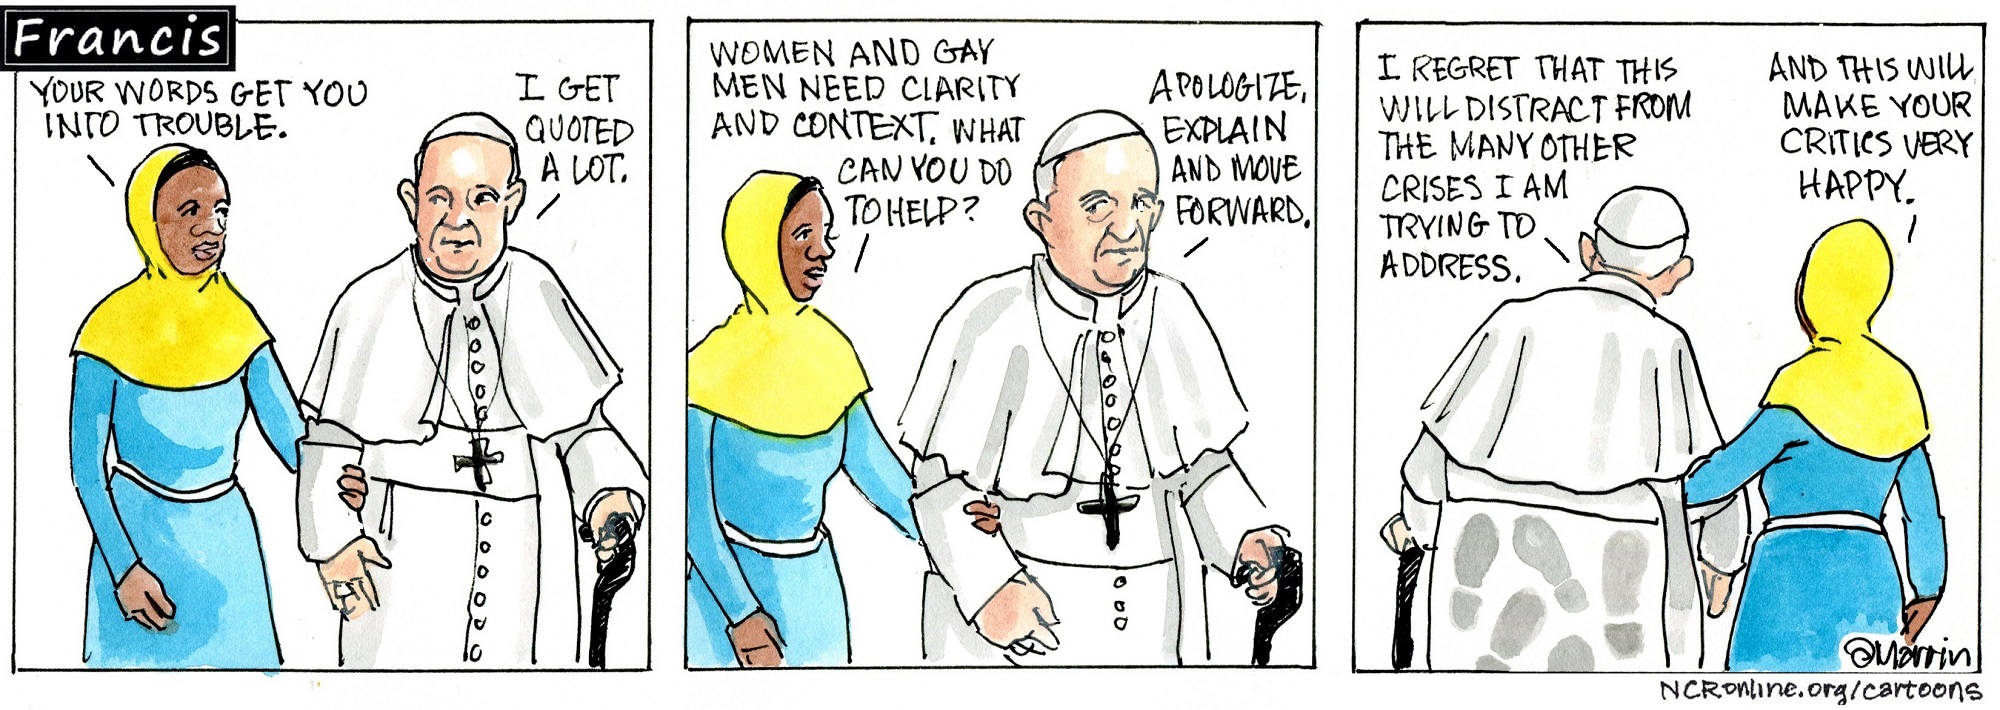 Francis, the comic strip: Francis acknowledges to Gabby that words can sometimes be used as weapons.